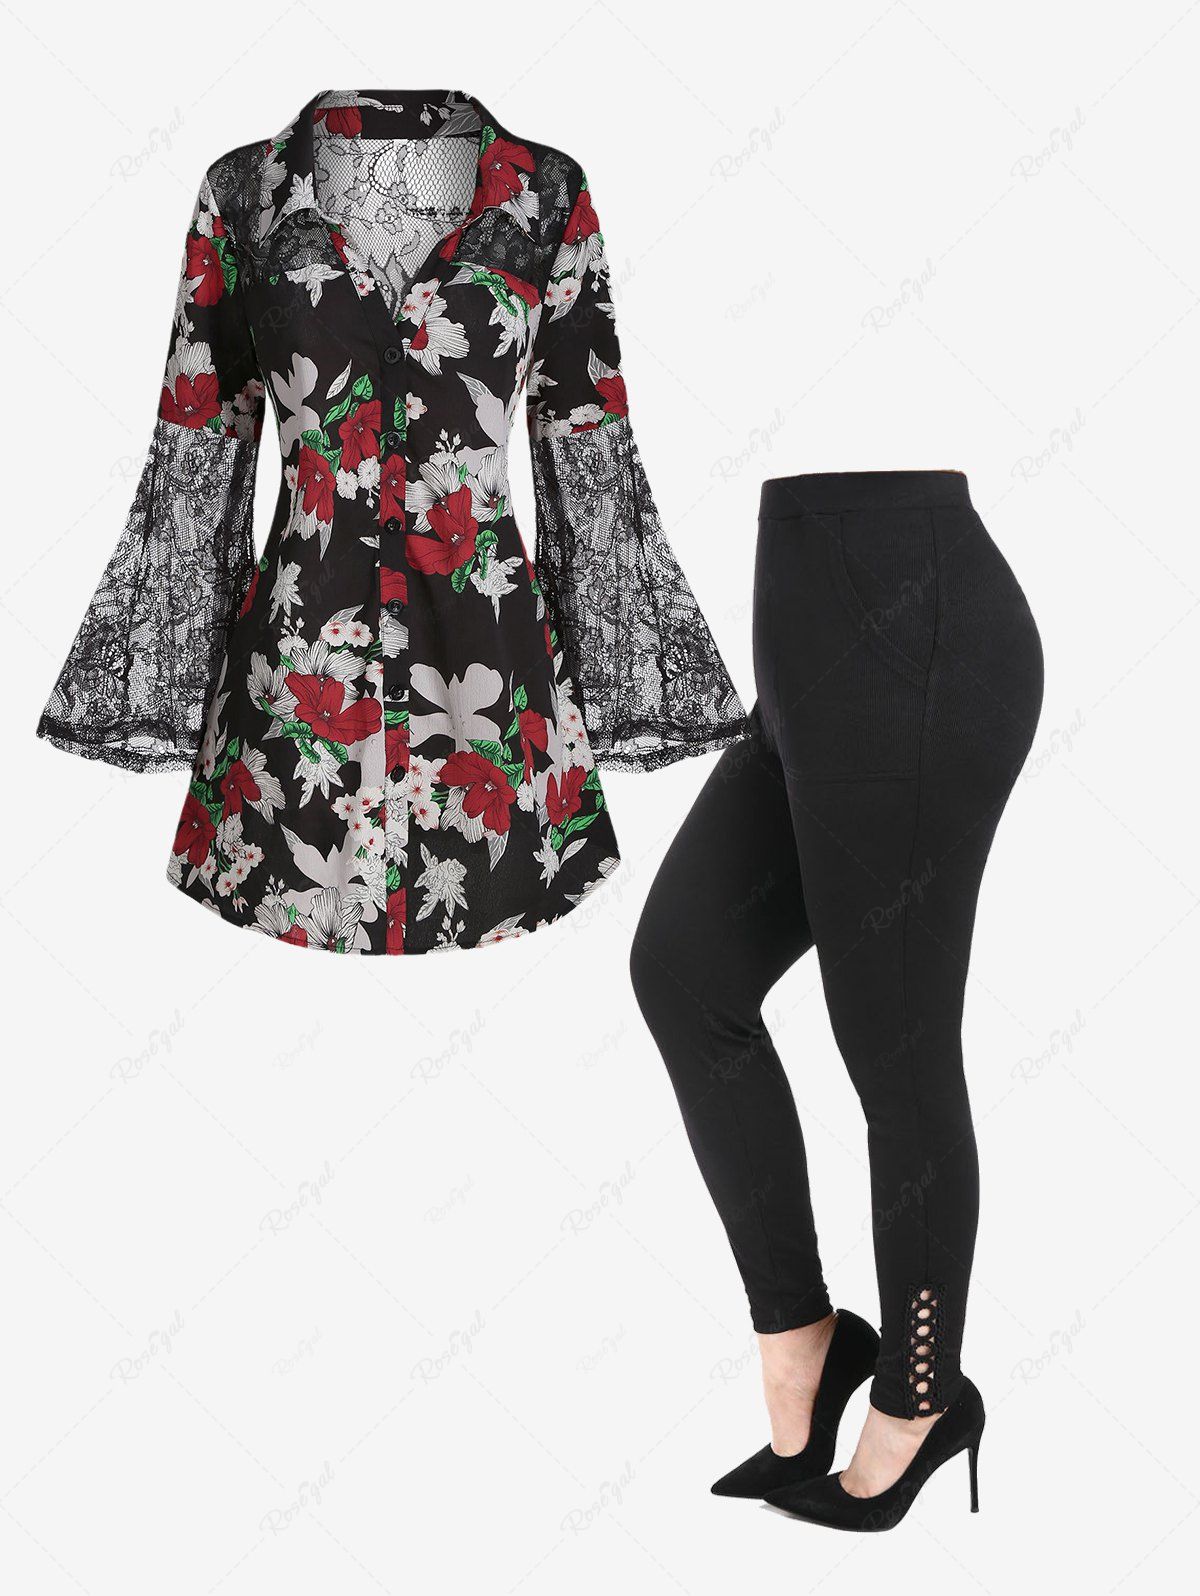 Buy Bell Sleeve Floral Print Shirt and Cutout Twist Leggings Plus Size Fall Outfit  